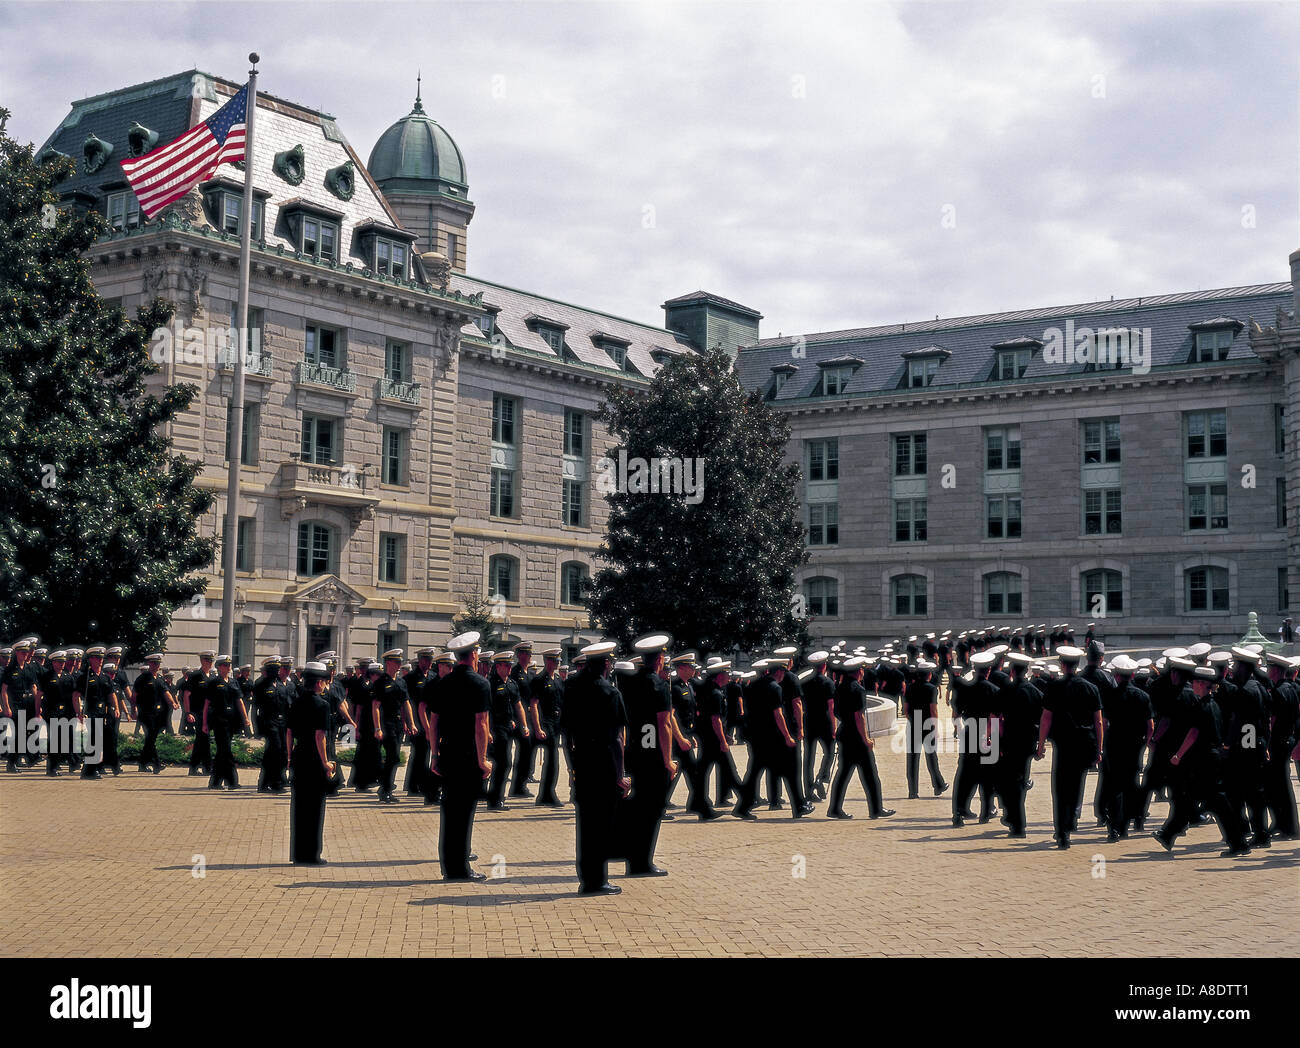 US Naval Academy, Annapolis, Maryland, USA Banque D'Images